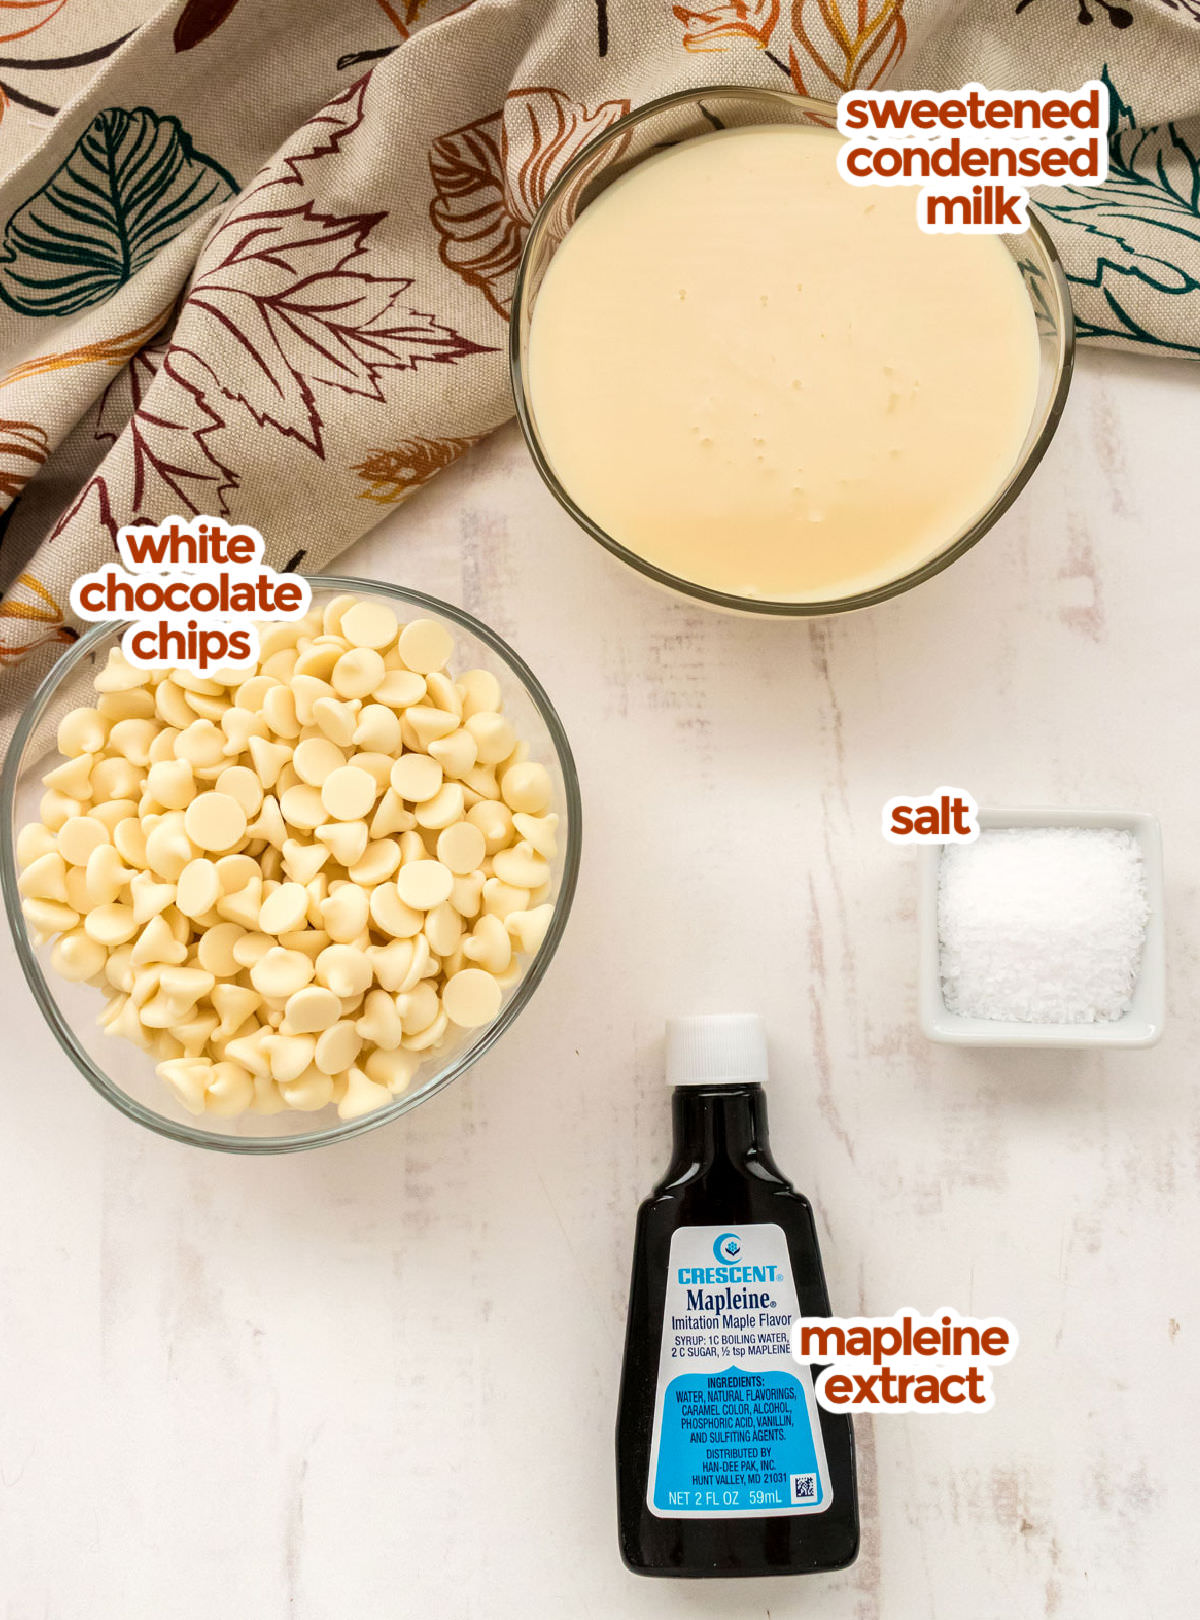 All the ingredients you will need to make Maple Fudge including Sweetened Condensed Milk, White Chocolate Chips, Salt and Mapleine Extract.